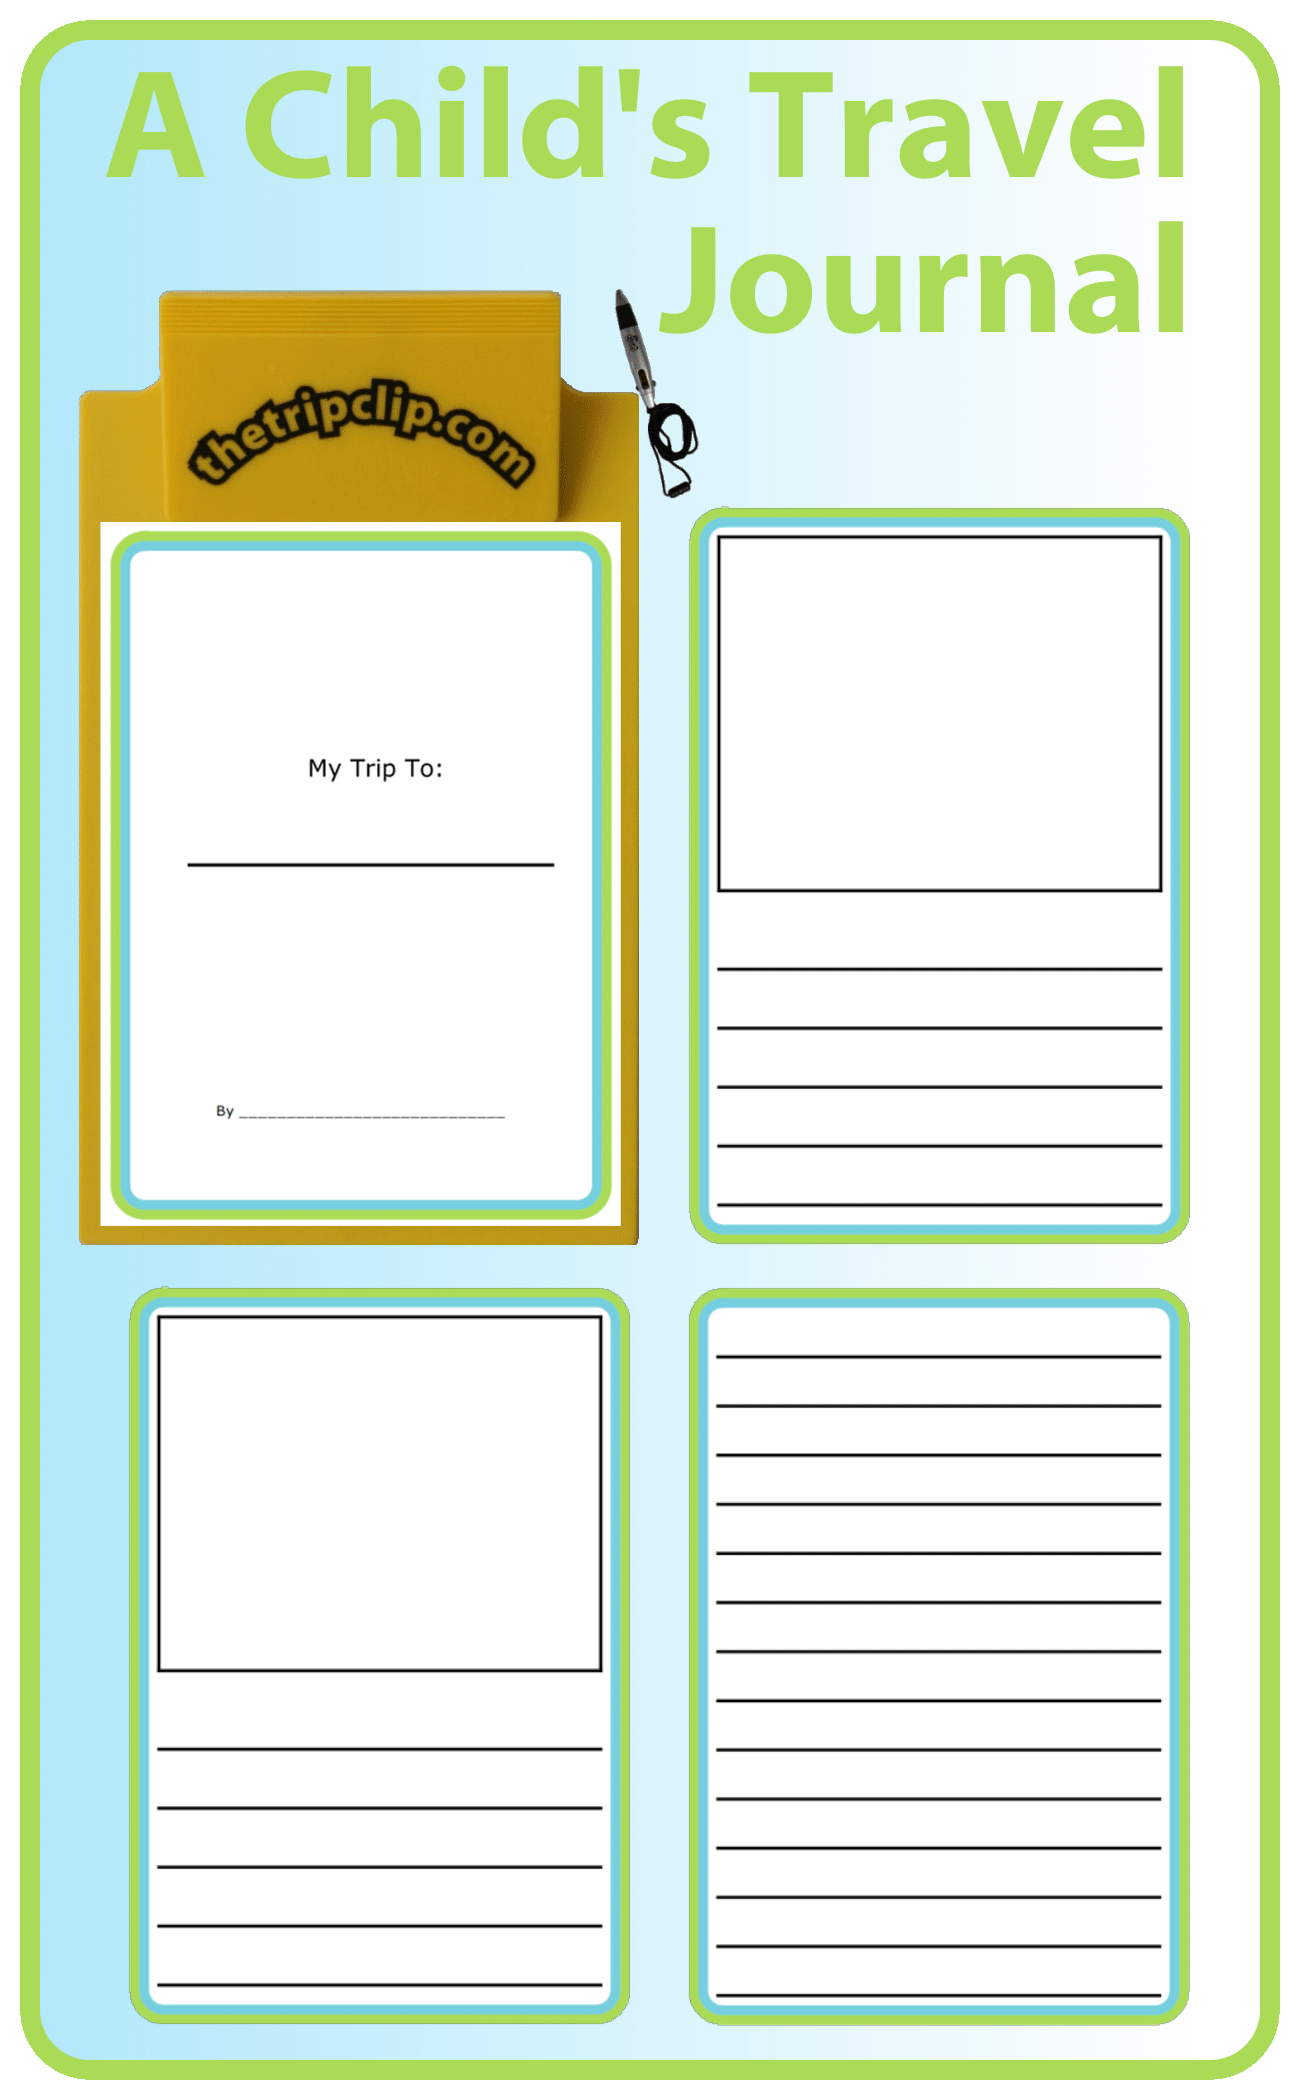 Travel journal templates for kids with space for picture and words